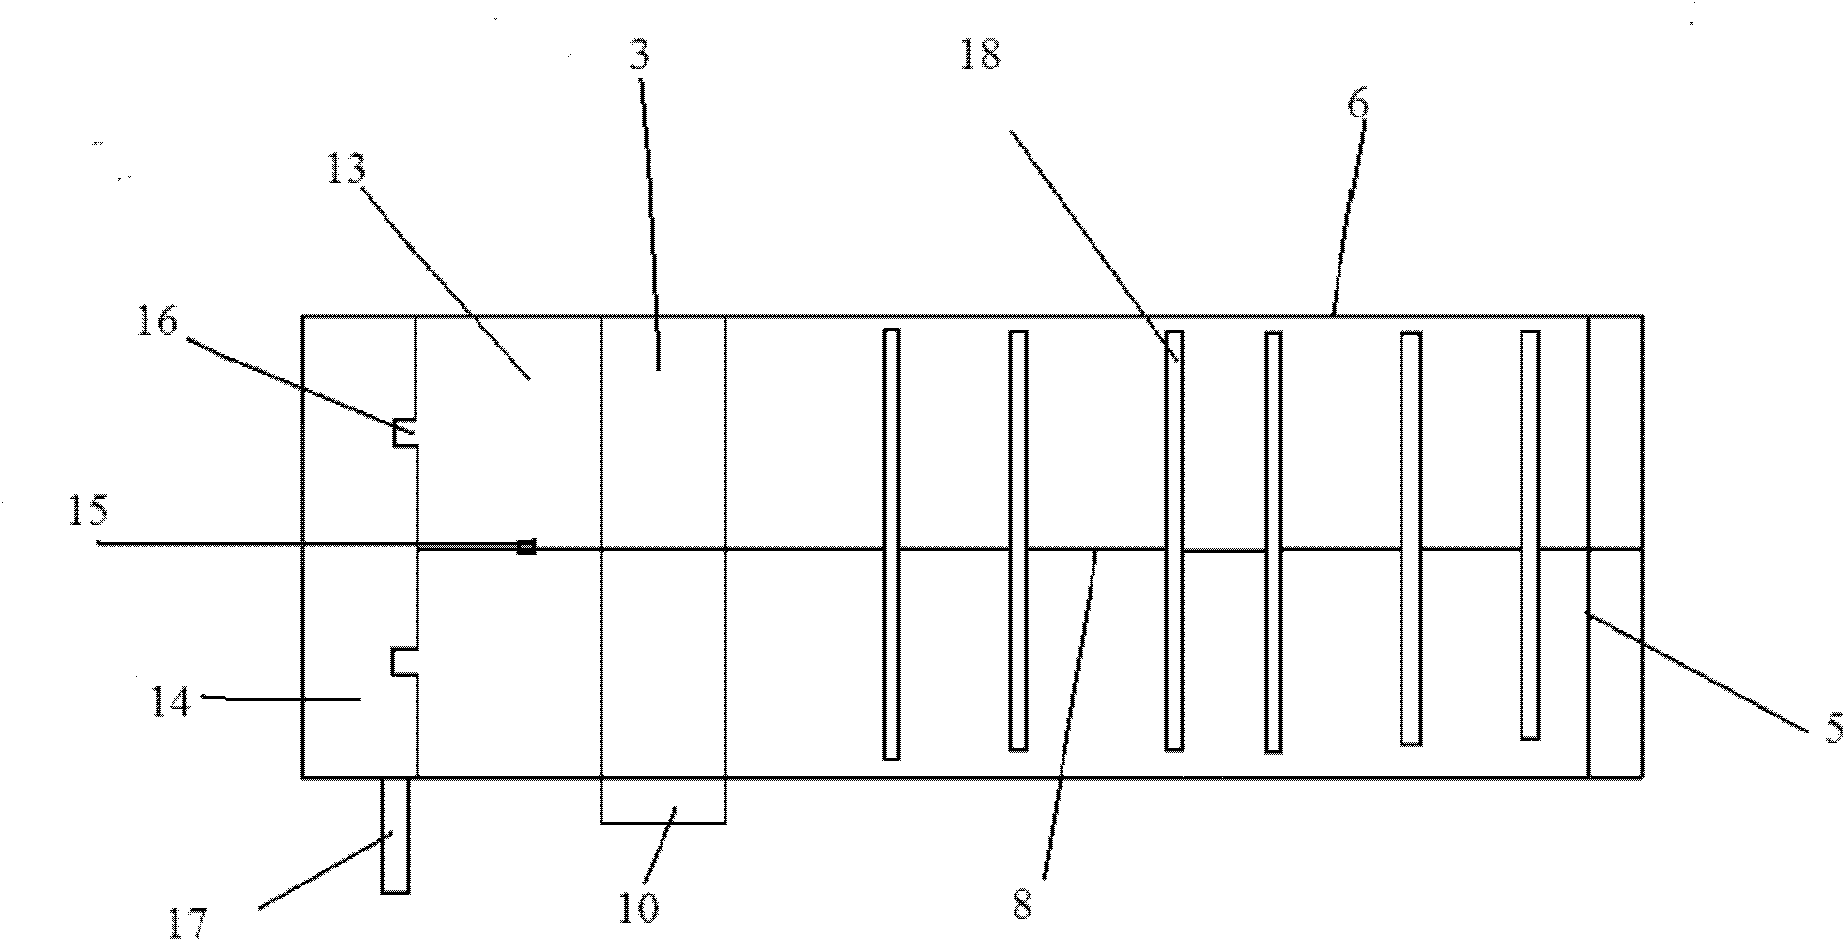 Integrated slope runoff simulation and monitoring device